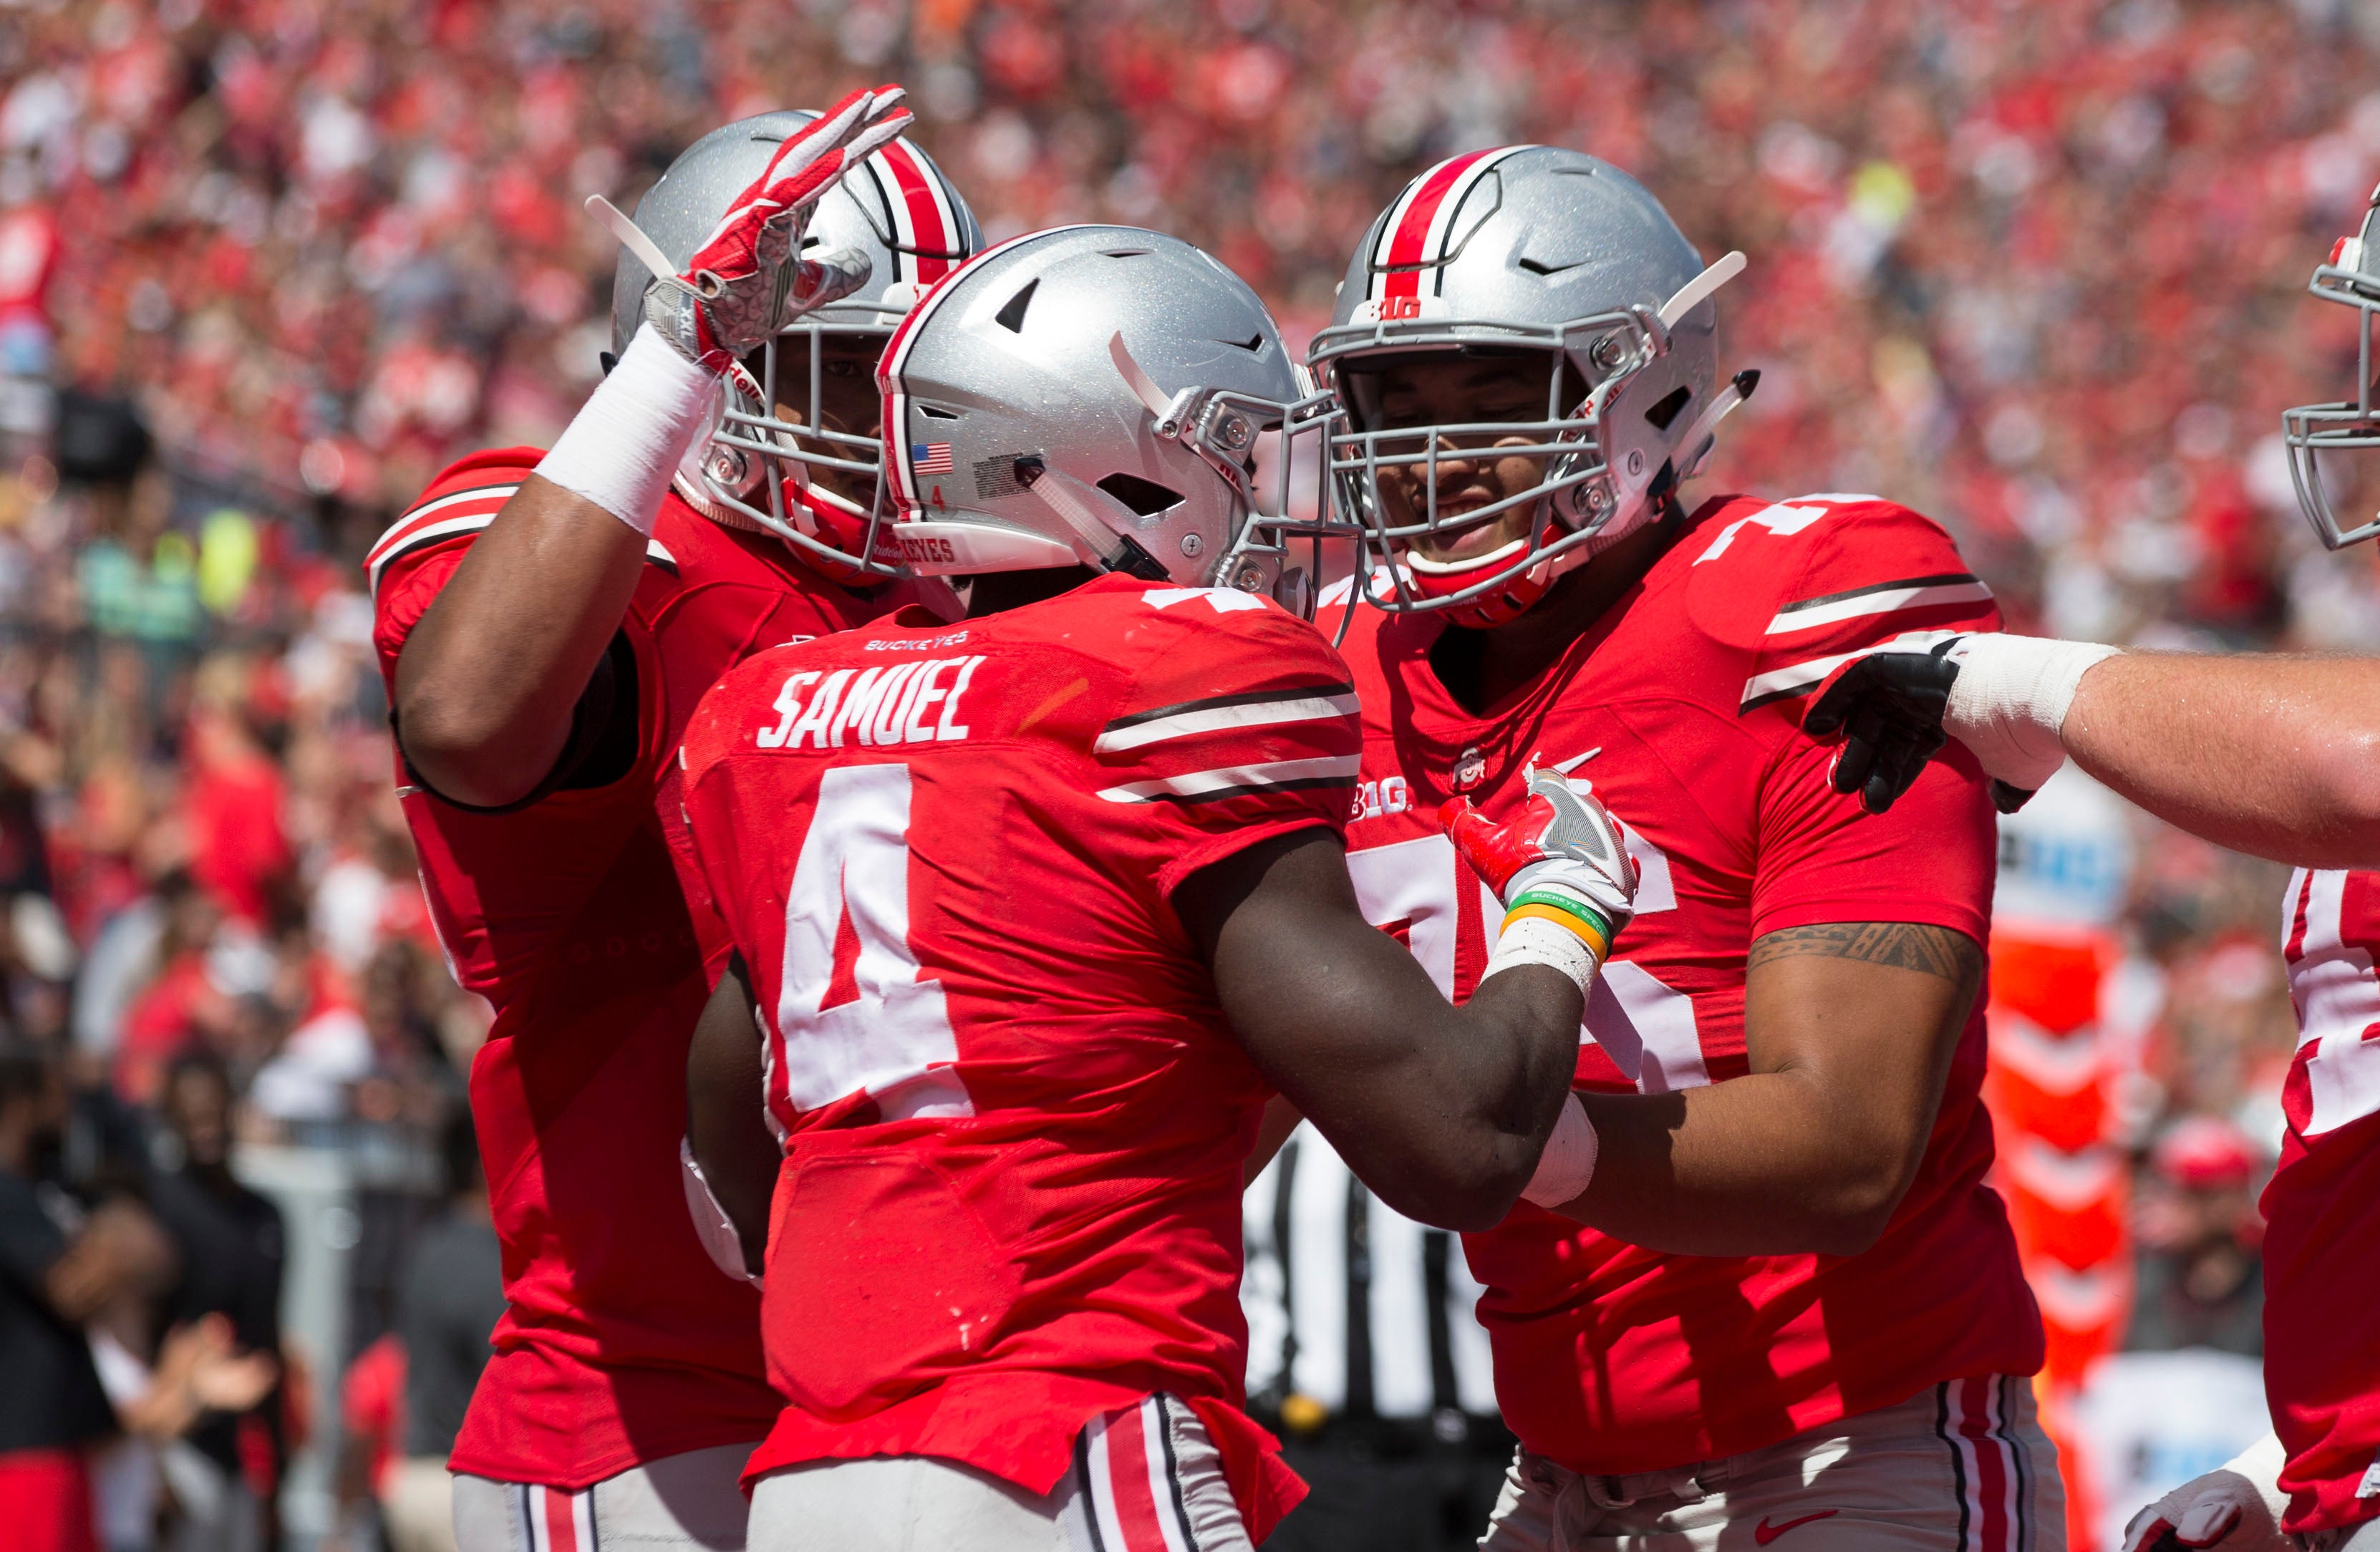 Day hopes injured Buckeyes are back Saturday - Wilmington News Journal